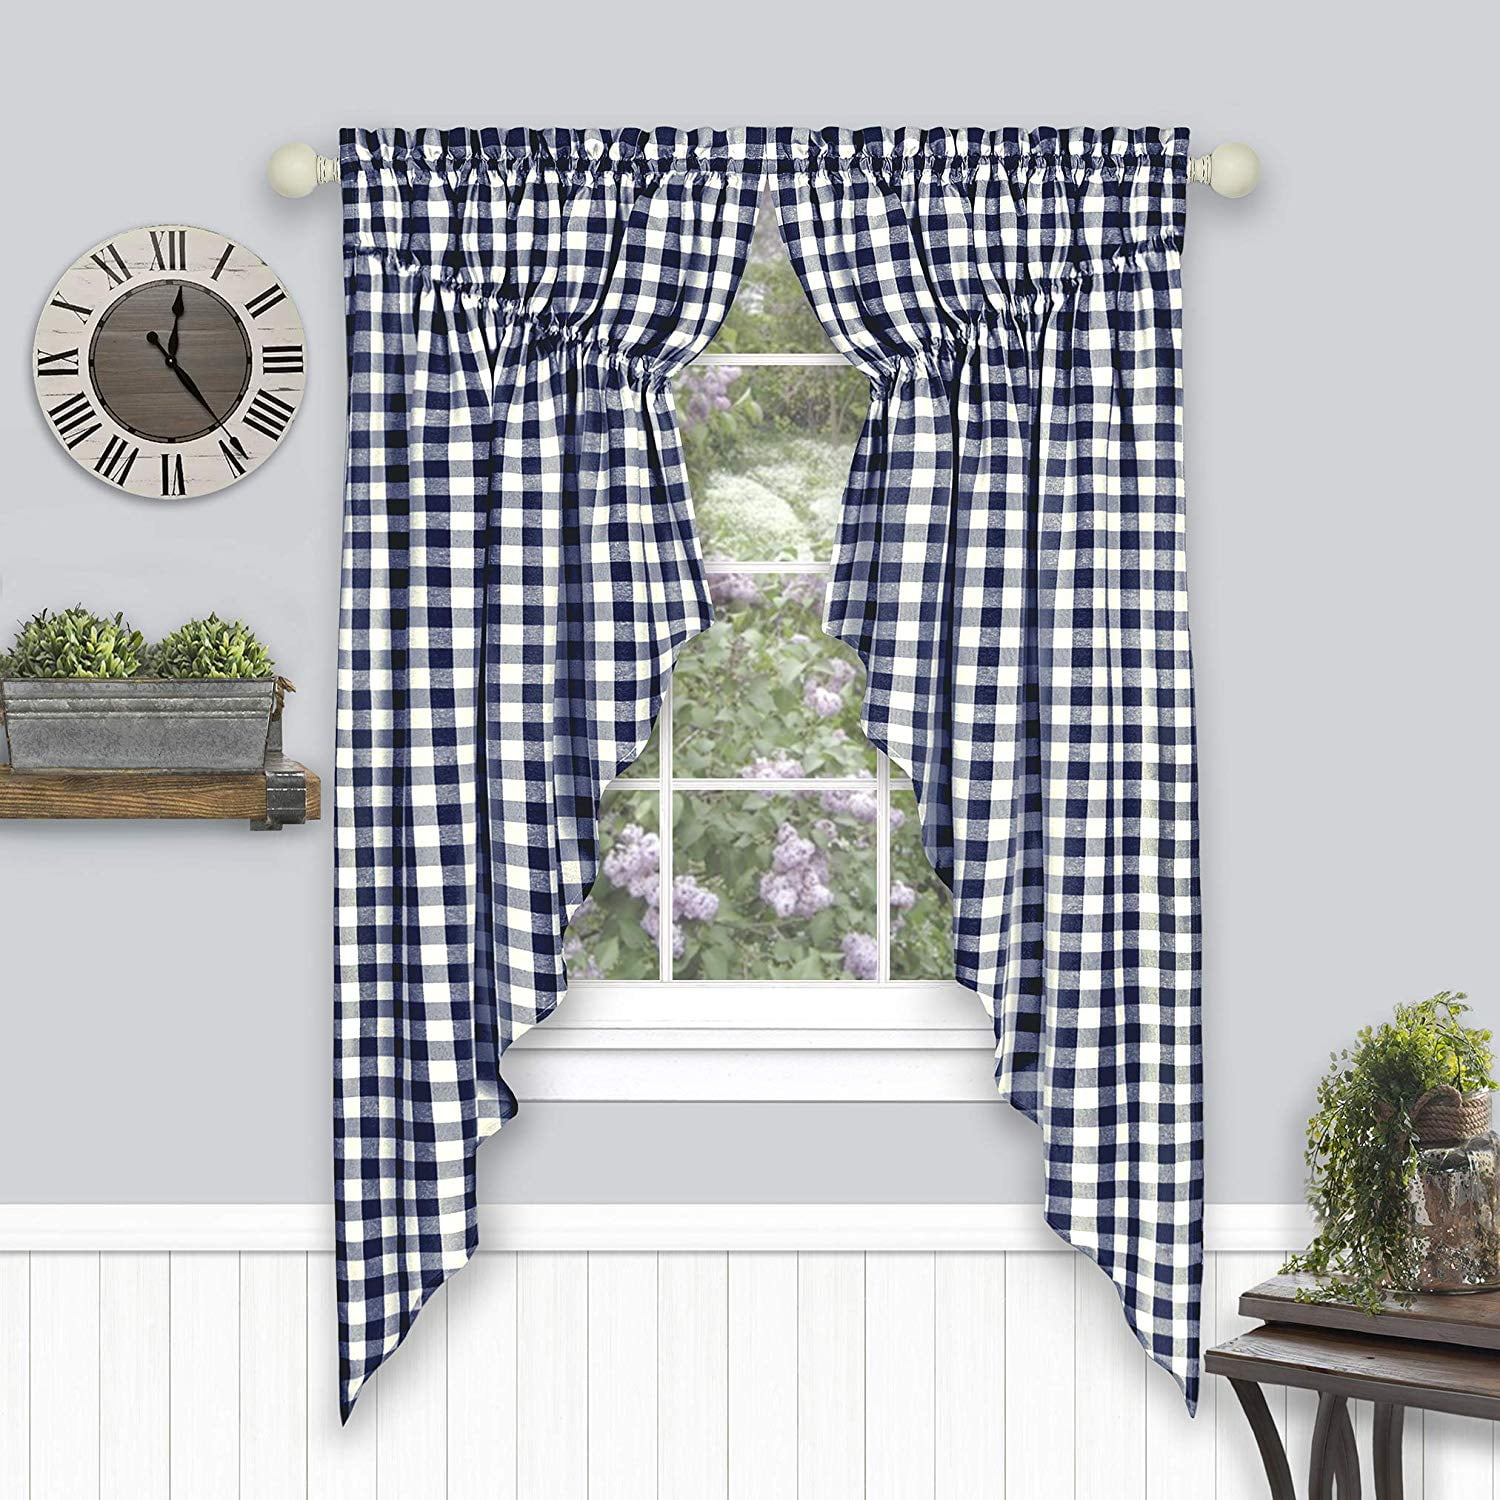 Plaid Buffalo Check Curtains Black and White Curtain Panels Country Decor 